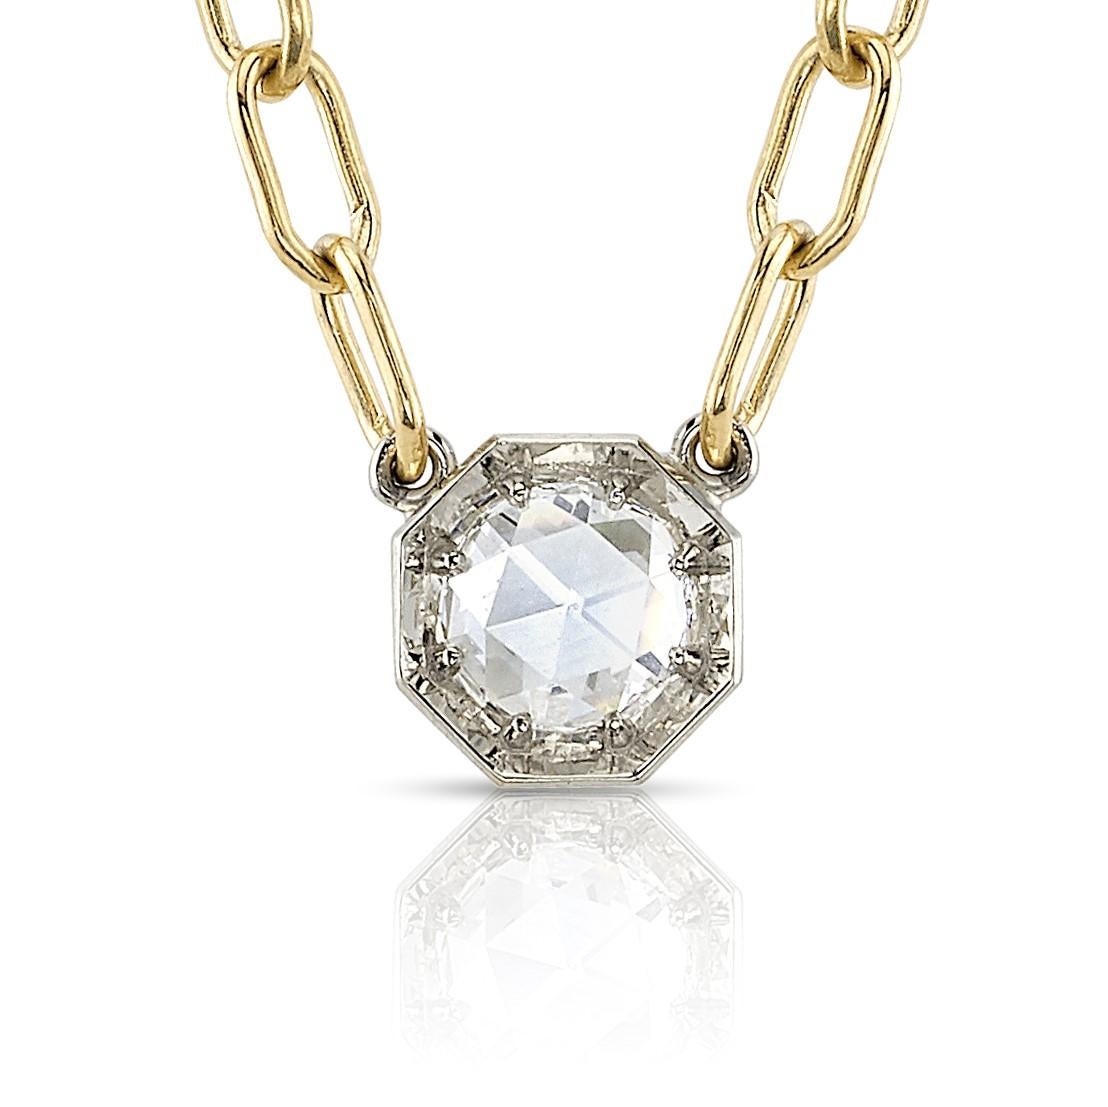 0.60ctw F/VS1 GIA certified Rose cut diamond set in a handcrafted 18K champagne gold pendant. Pendant is set on a handcrafted 18K yellow gold bond chain.

Chain measures 17